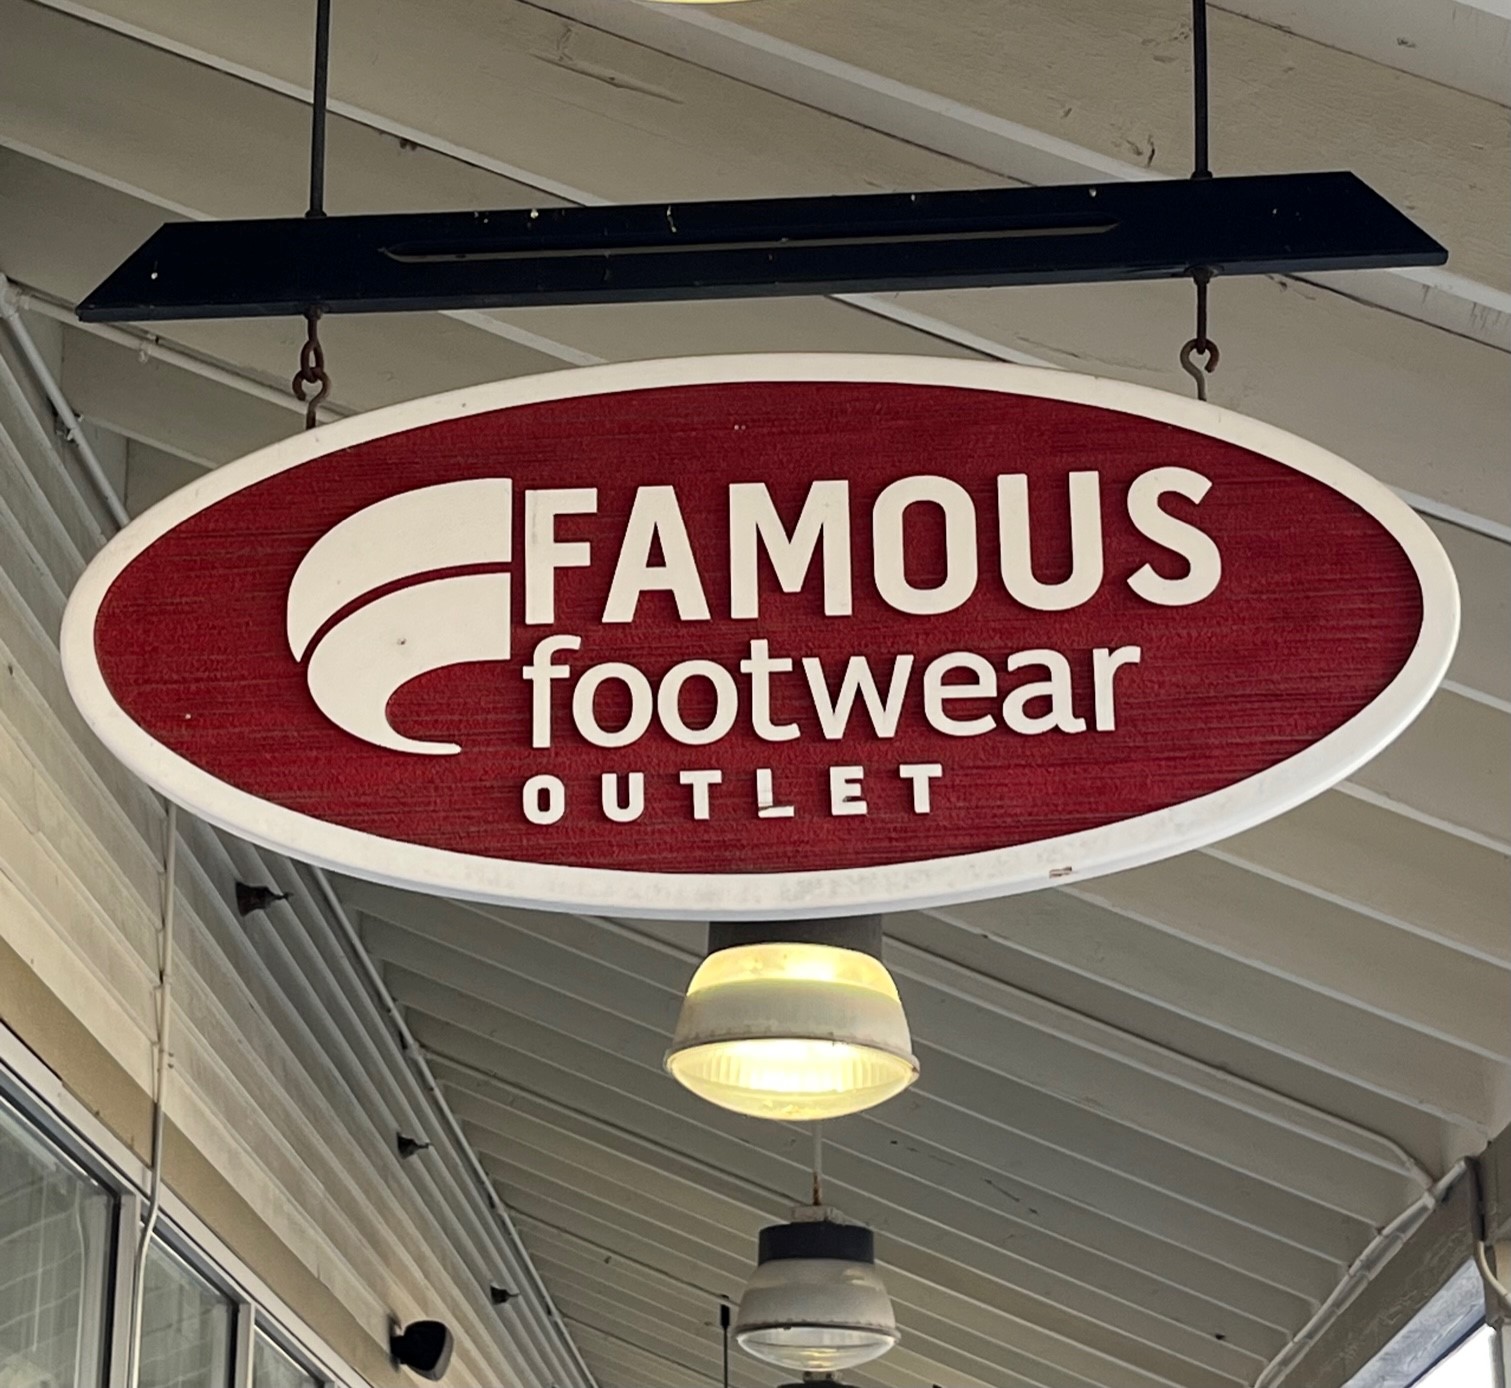 Sign for Famous Footwear Outlet in Tuscola.